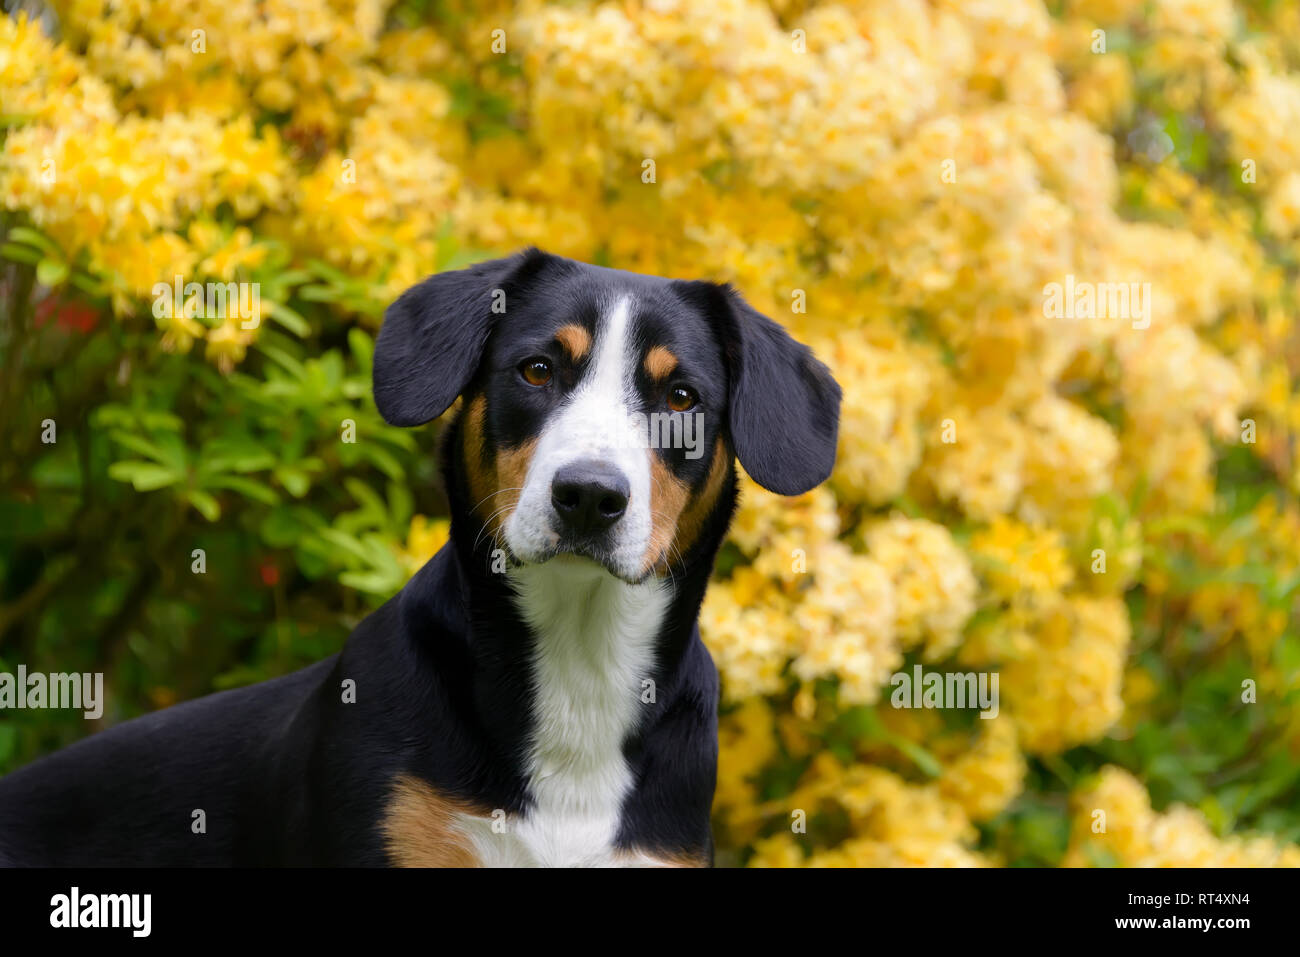 Entlebucher Mountain Dog tricolor with symmetrical markings of black, tan and white, portrait in front of yellow flowering Rhododendron Stock Photo